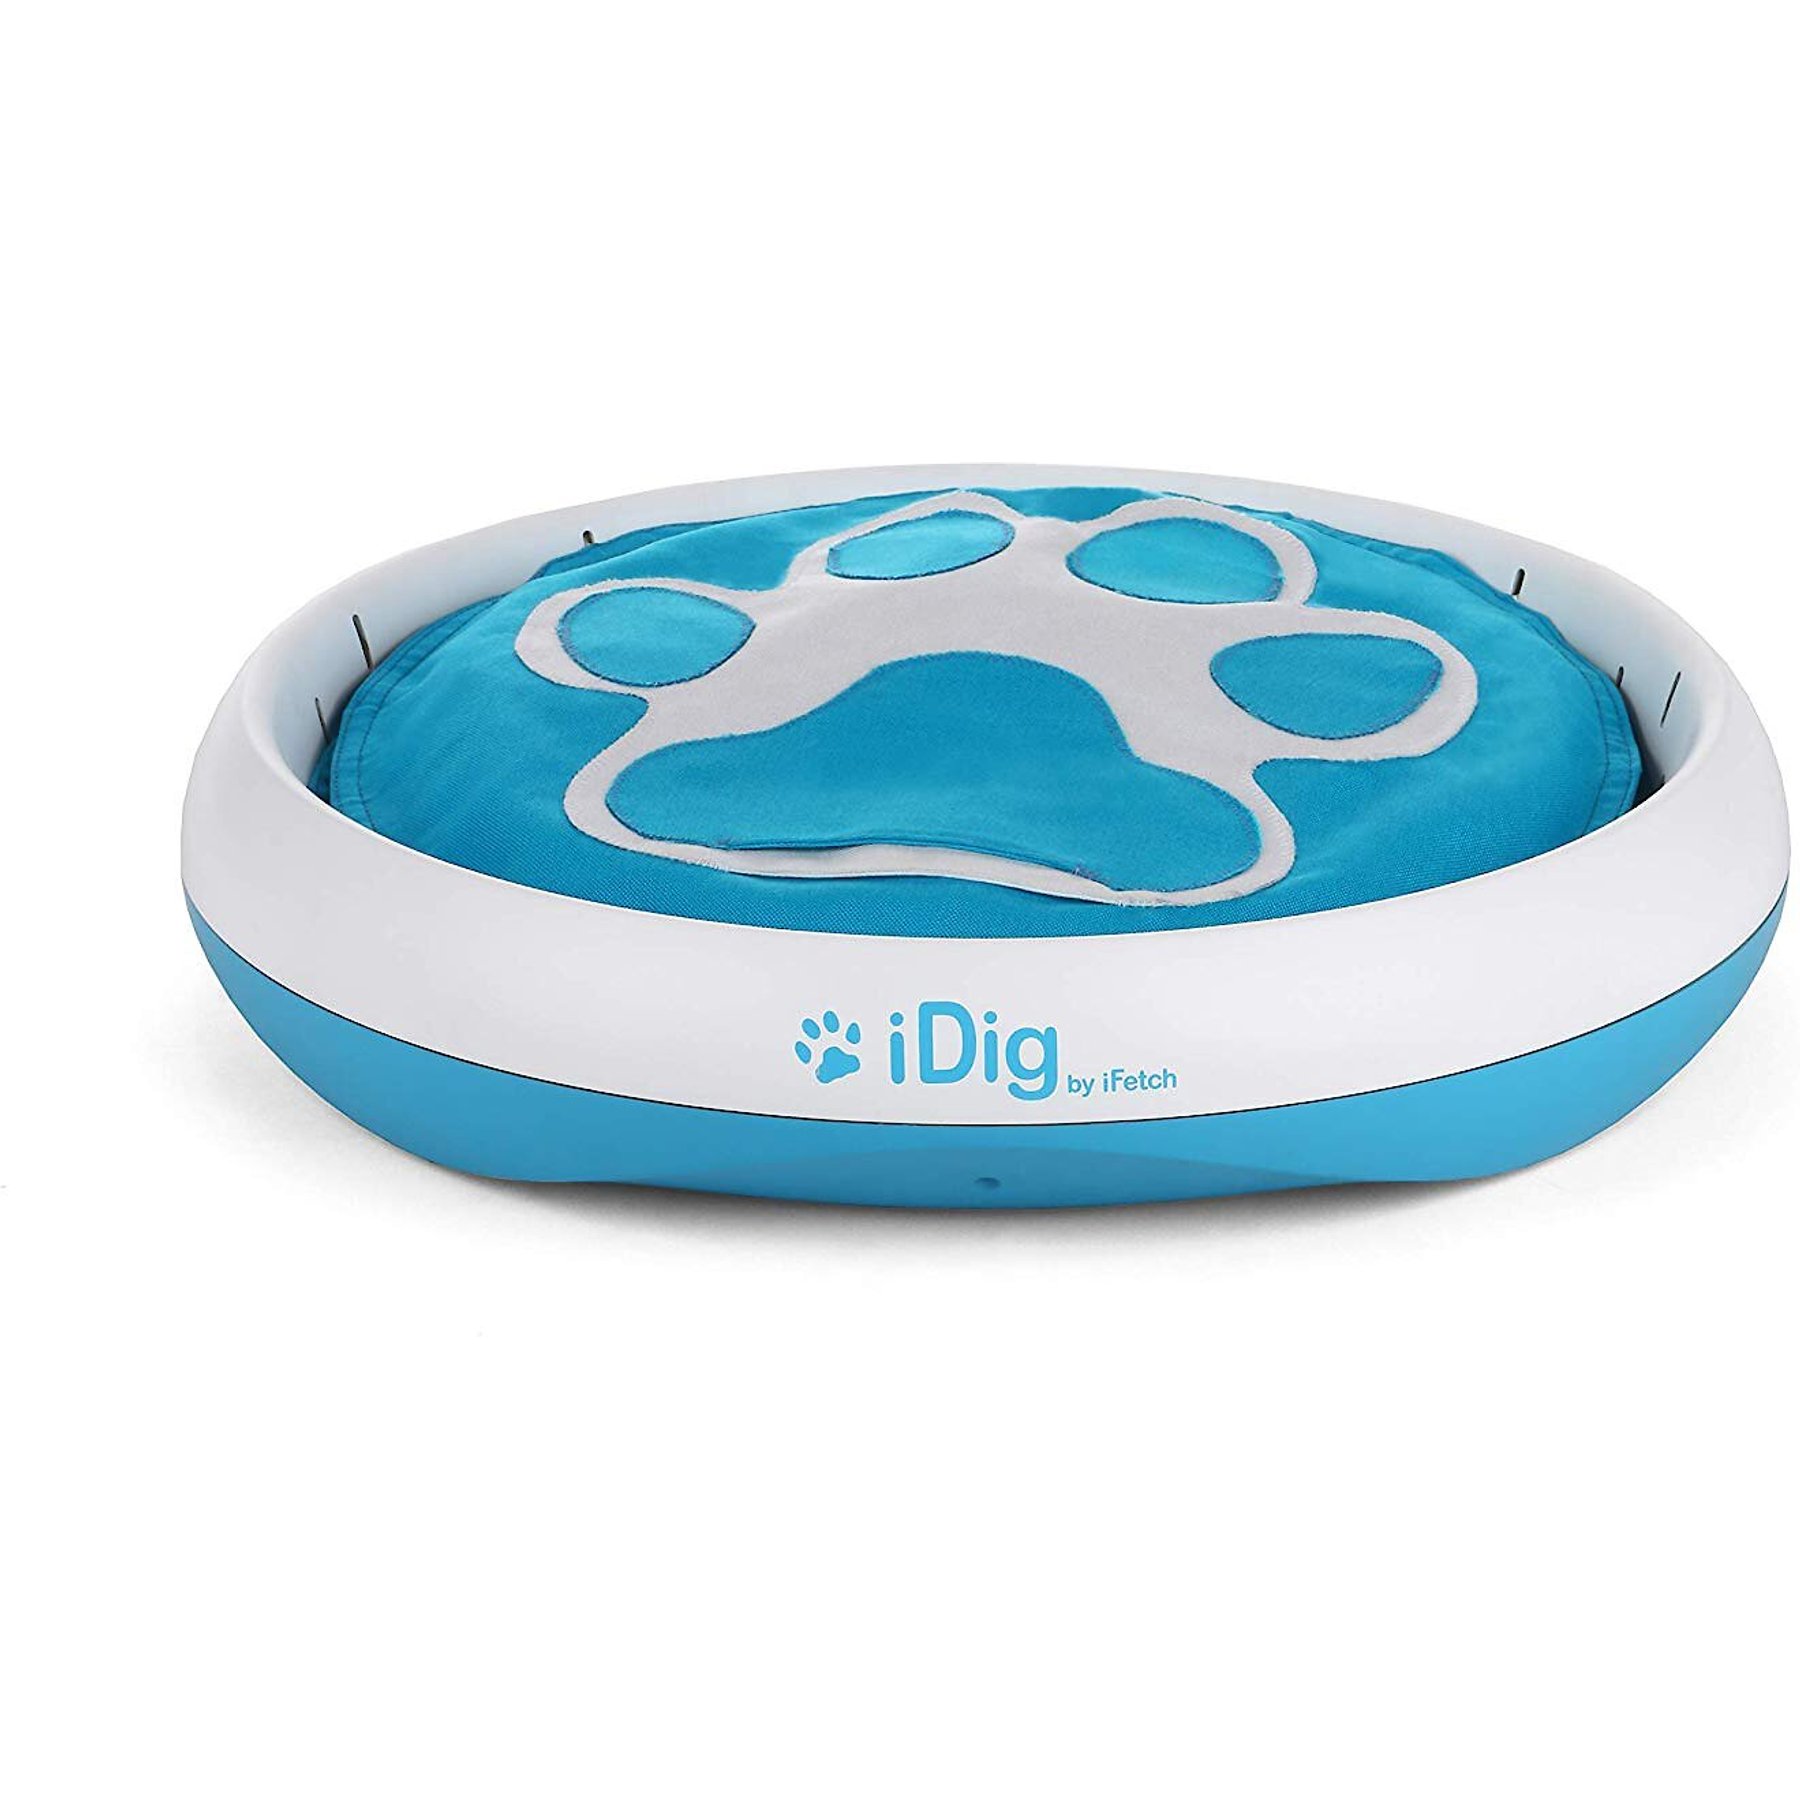 iDig Stay Digging Toy Dogs - BestBuy Mall